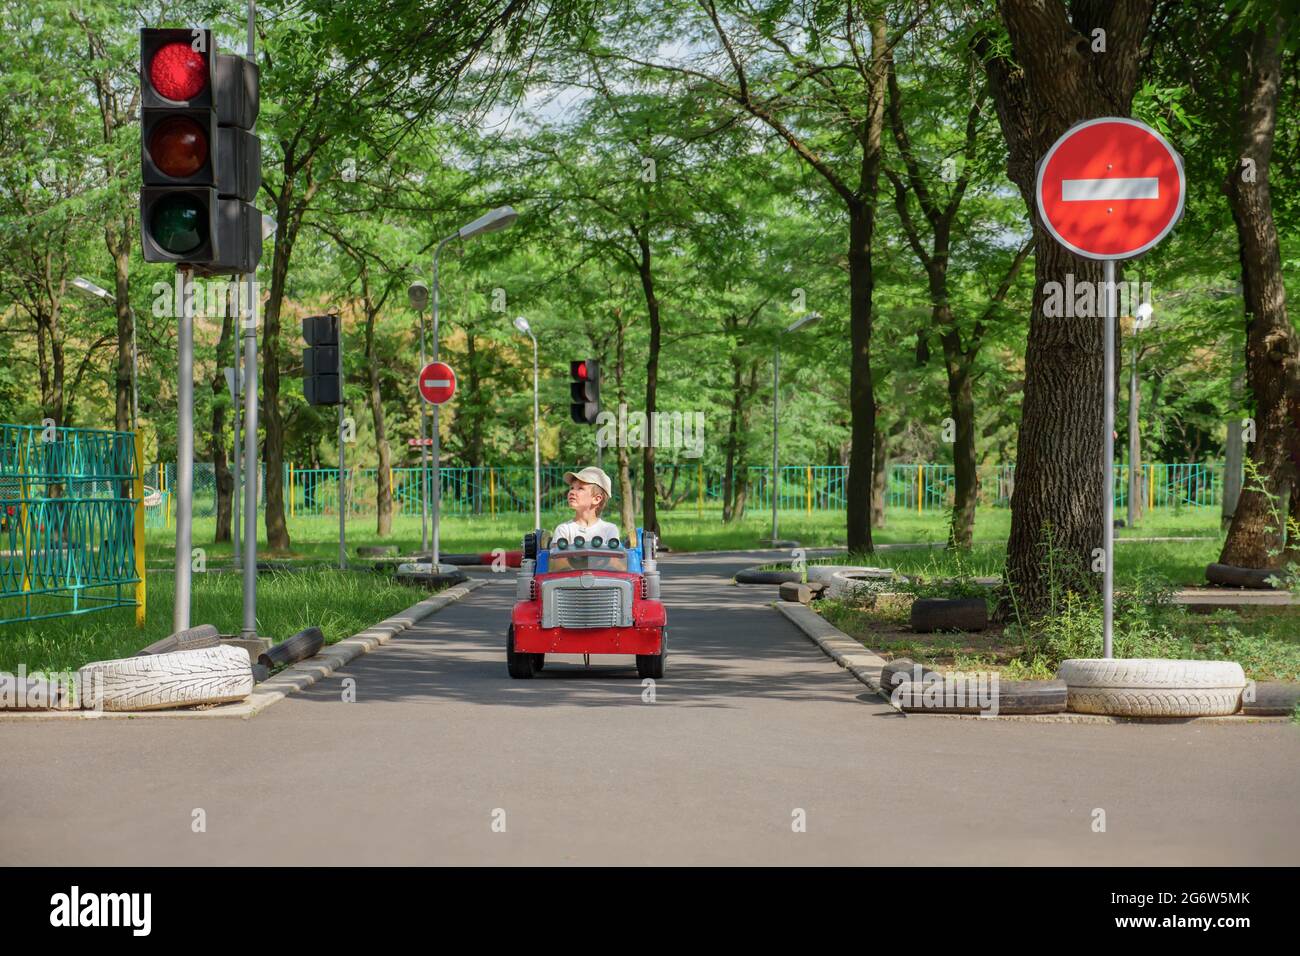 Safety traffic playground. Small boy driving toy car stops at traffic lights on playground child learn traffic rules game road safety education Stock Photo